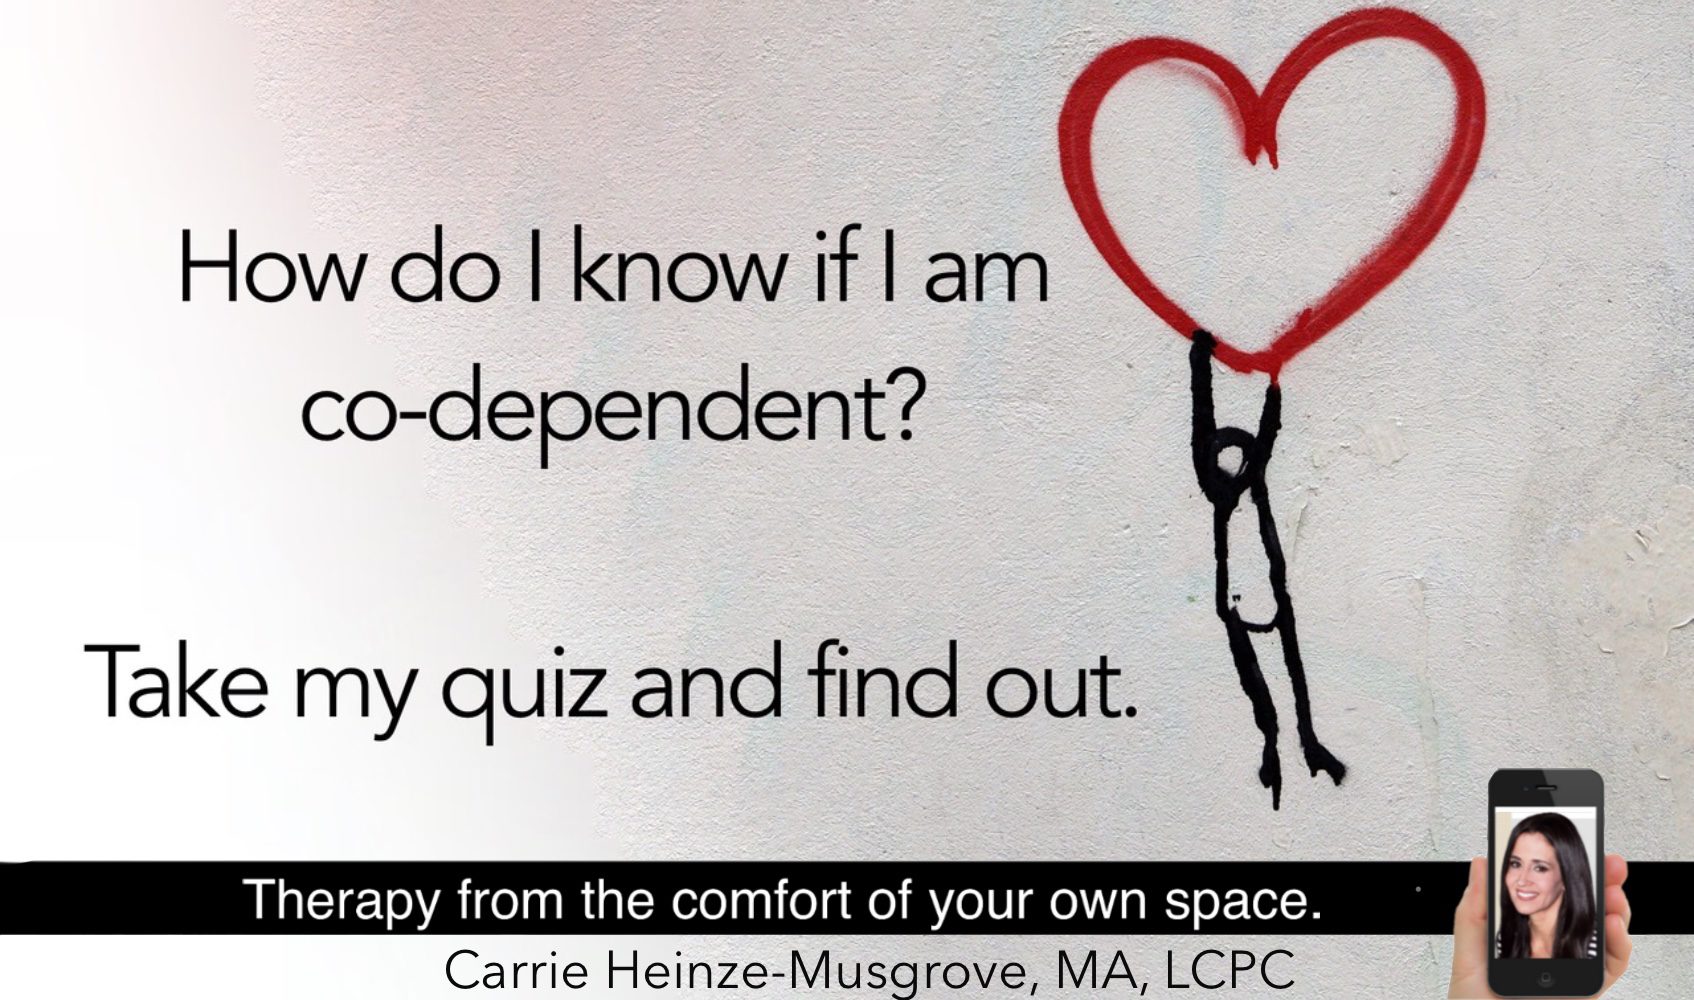 Is co-dependency a problem for you?